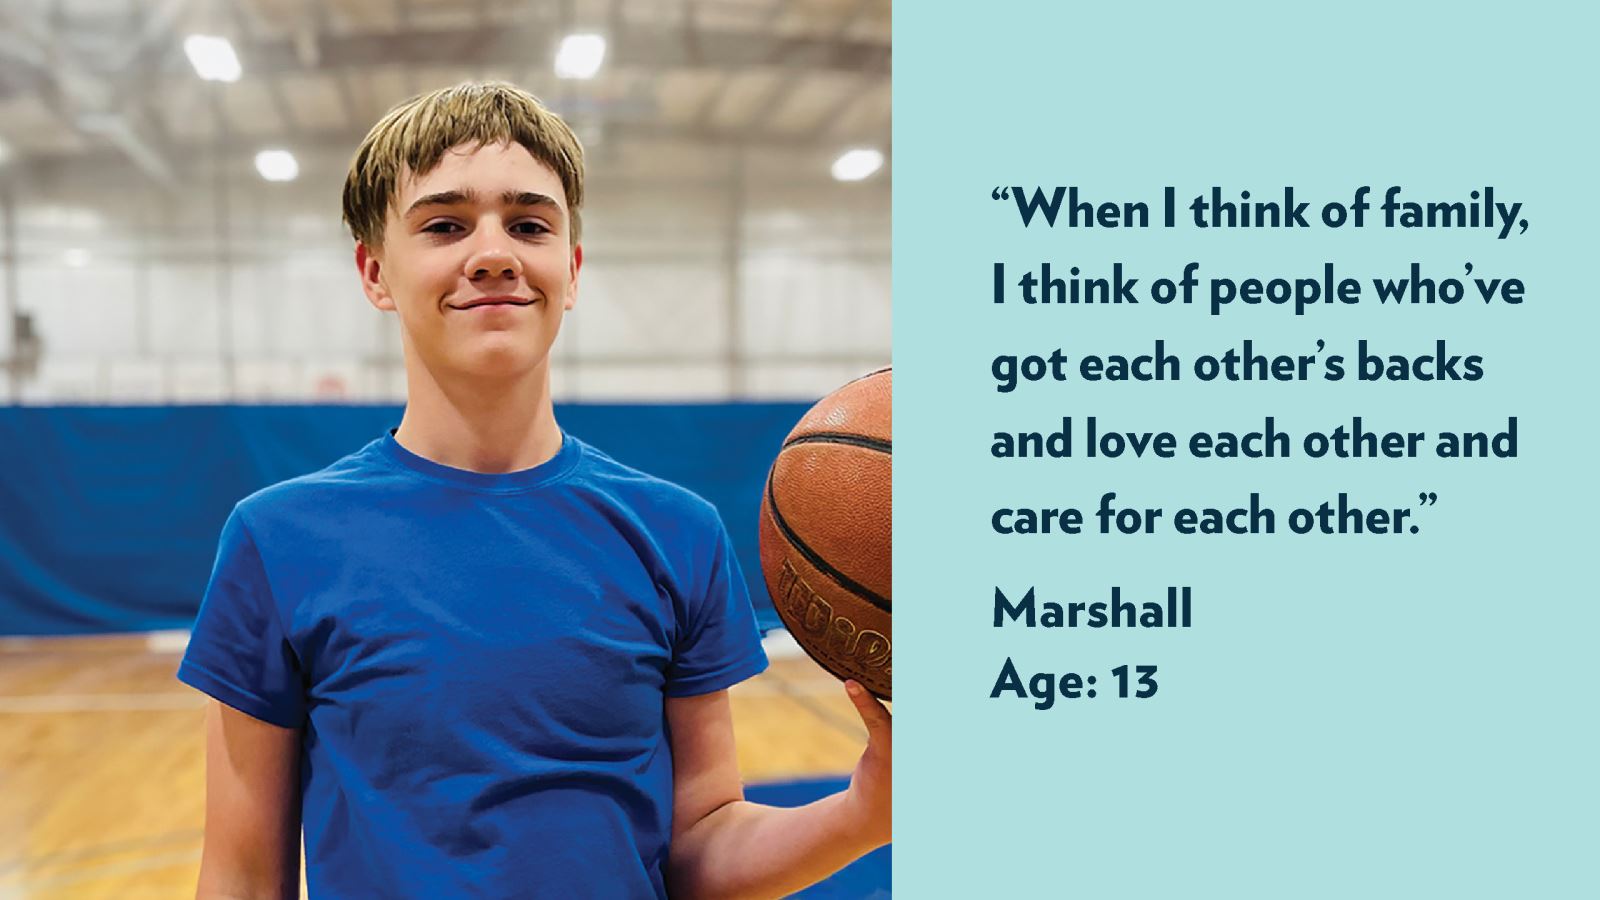 When I think of family, I think of people who’ve got each other’s backs and love each other and care for each other. Marshall, age 13. View profile.